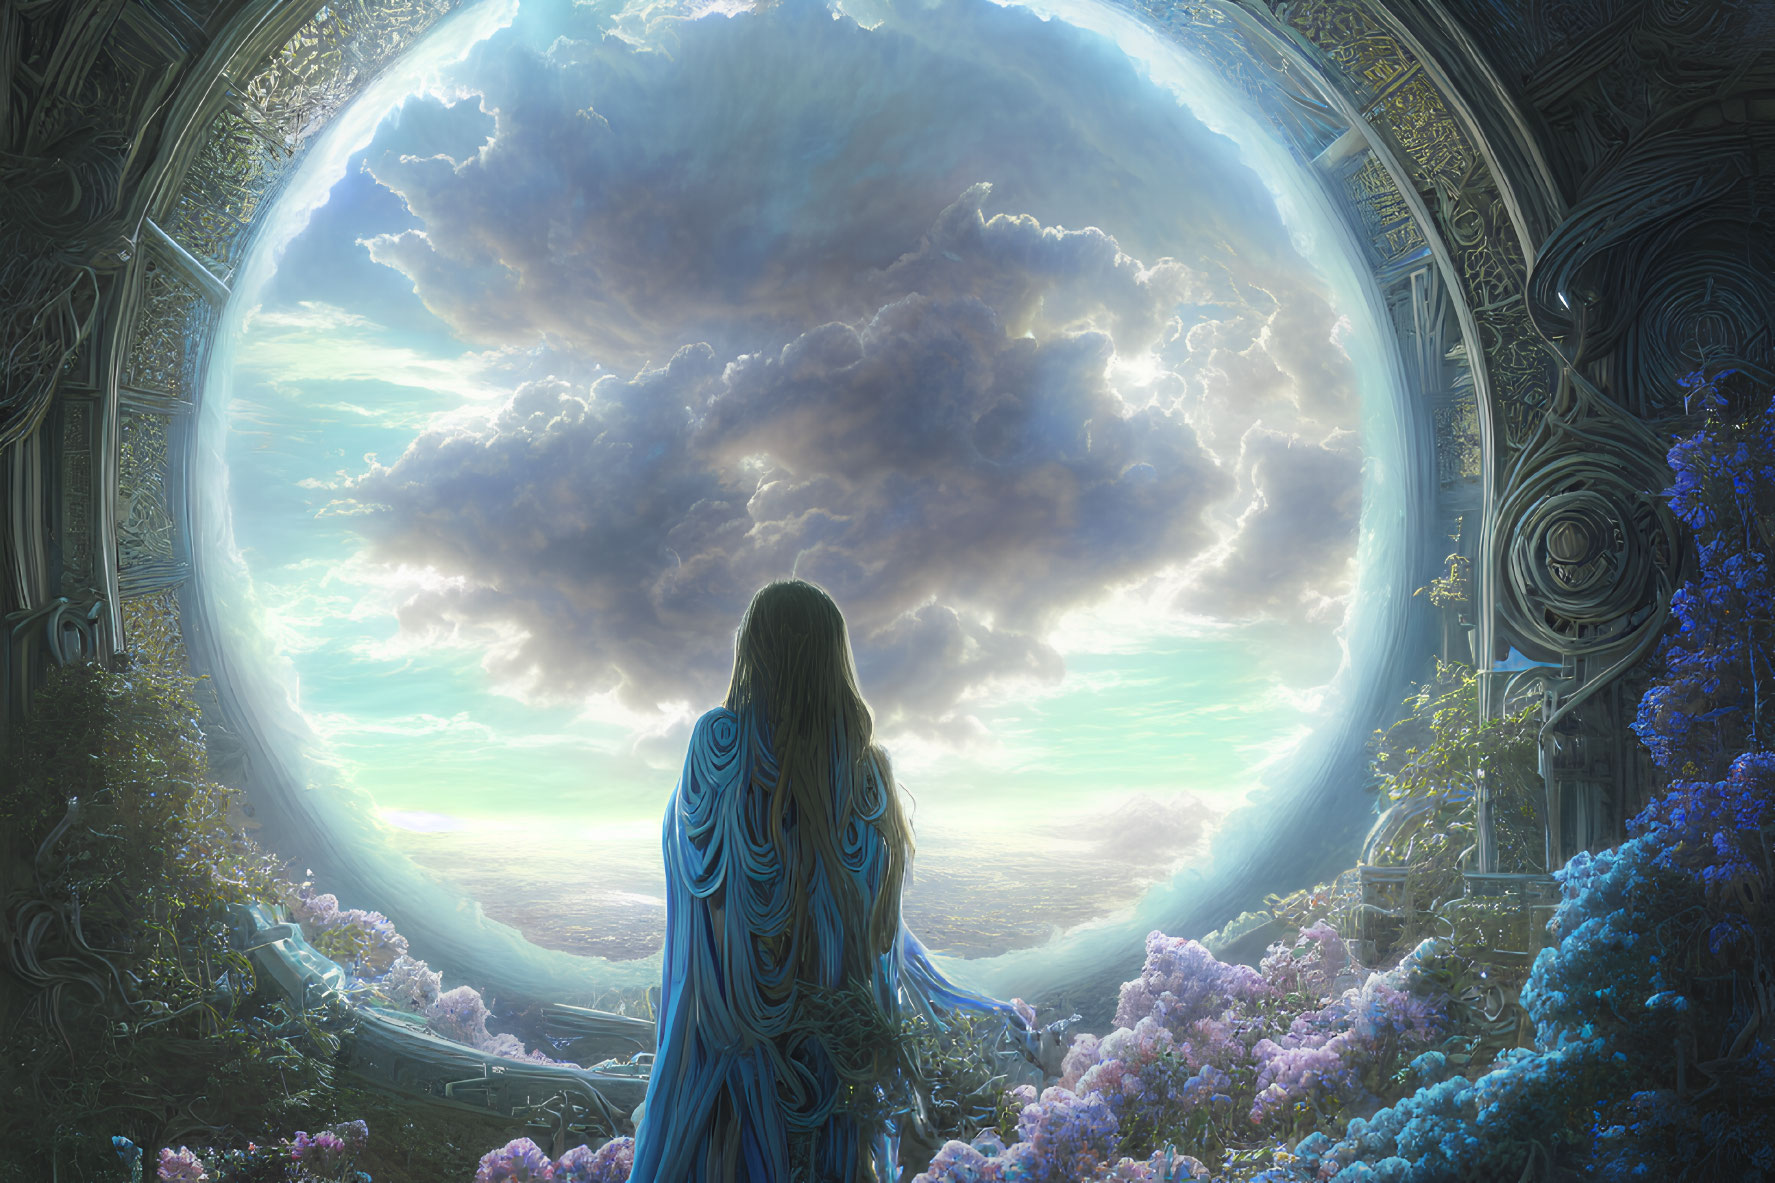 Person in Blue Cloak Standing at Ornate Archway Under Vast Sky